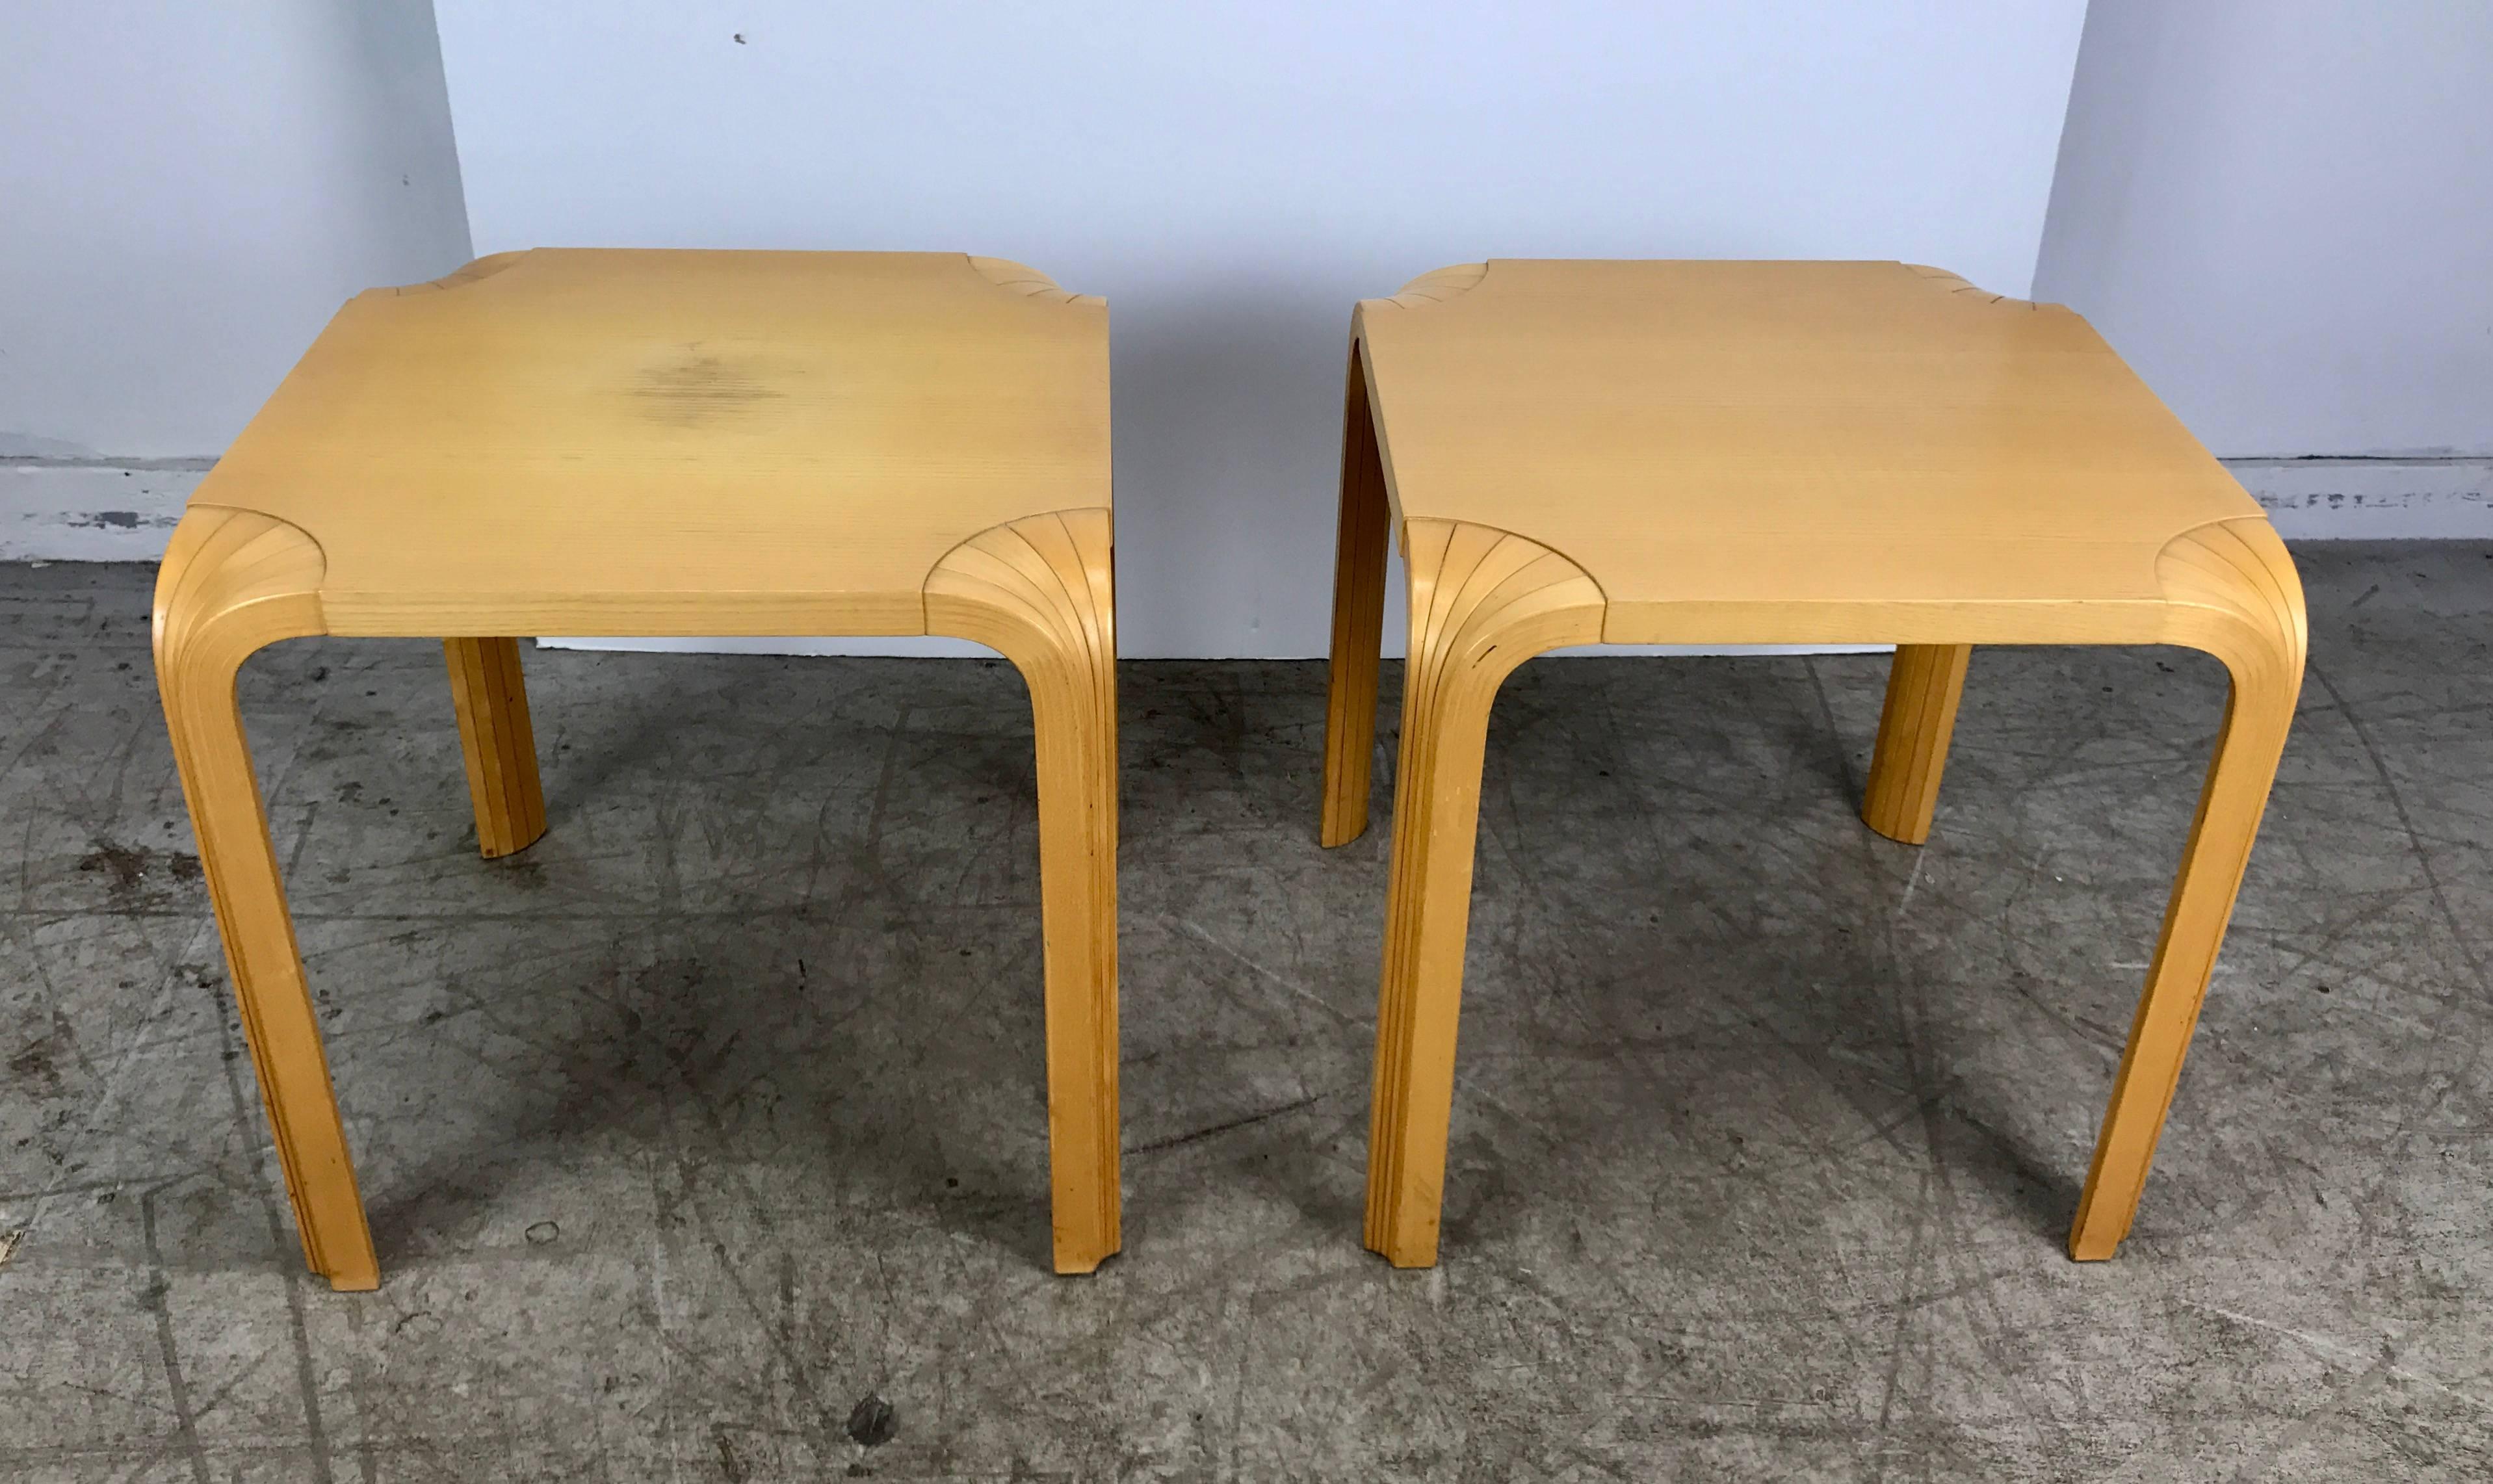 This fan leg stool or side table was designed by Alvar Aalto for Artek.
Tables in nice original condition. One table, approximately 6 inch diameter stain/ dis coloration. digital photos make stain appear worse then actual mark, amazing, warm